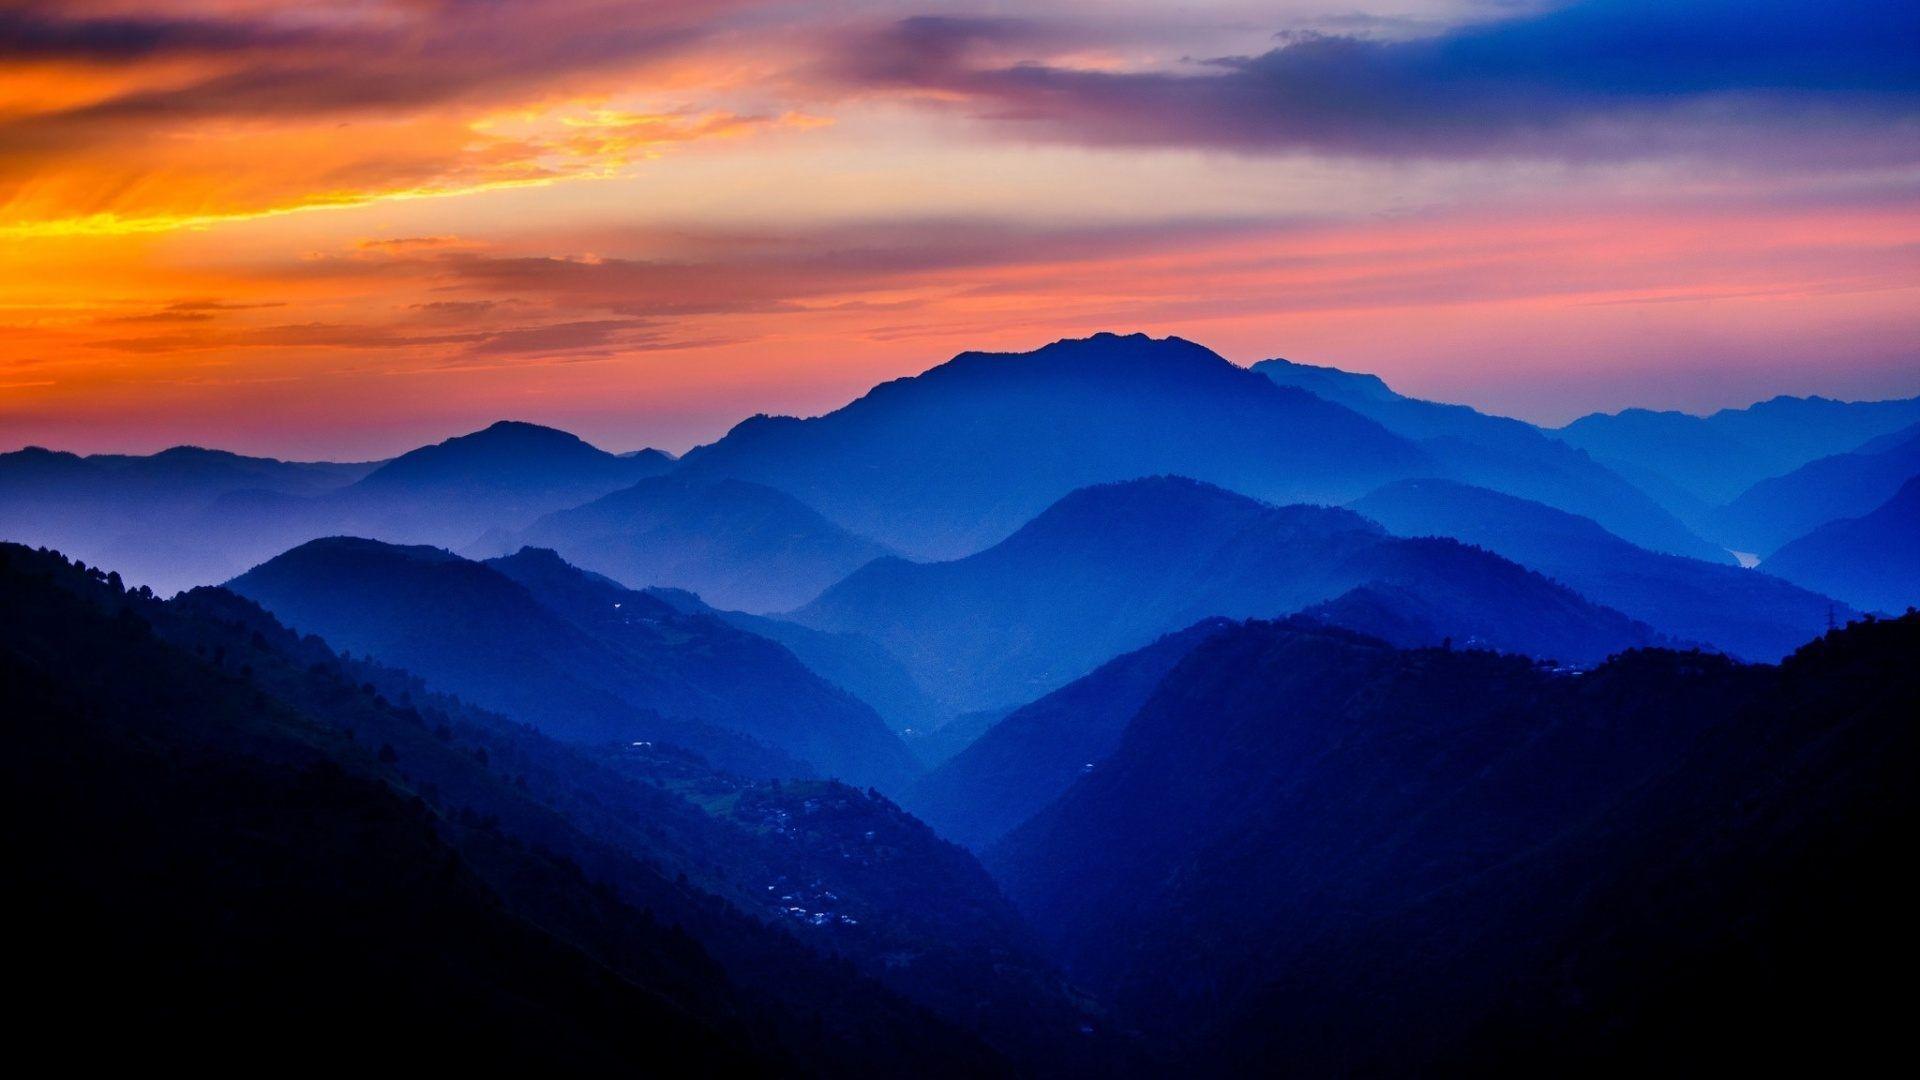 500 Mountains Sunset Pictures HD  Download Free Images on Unsplash